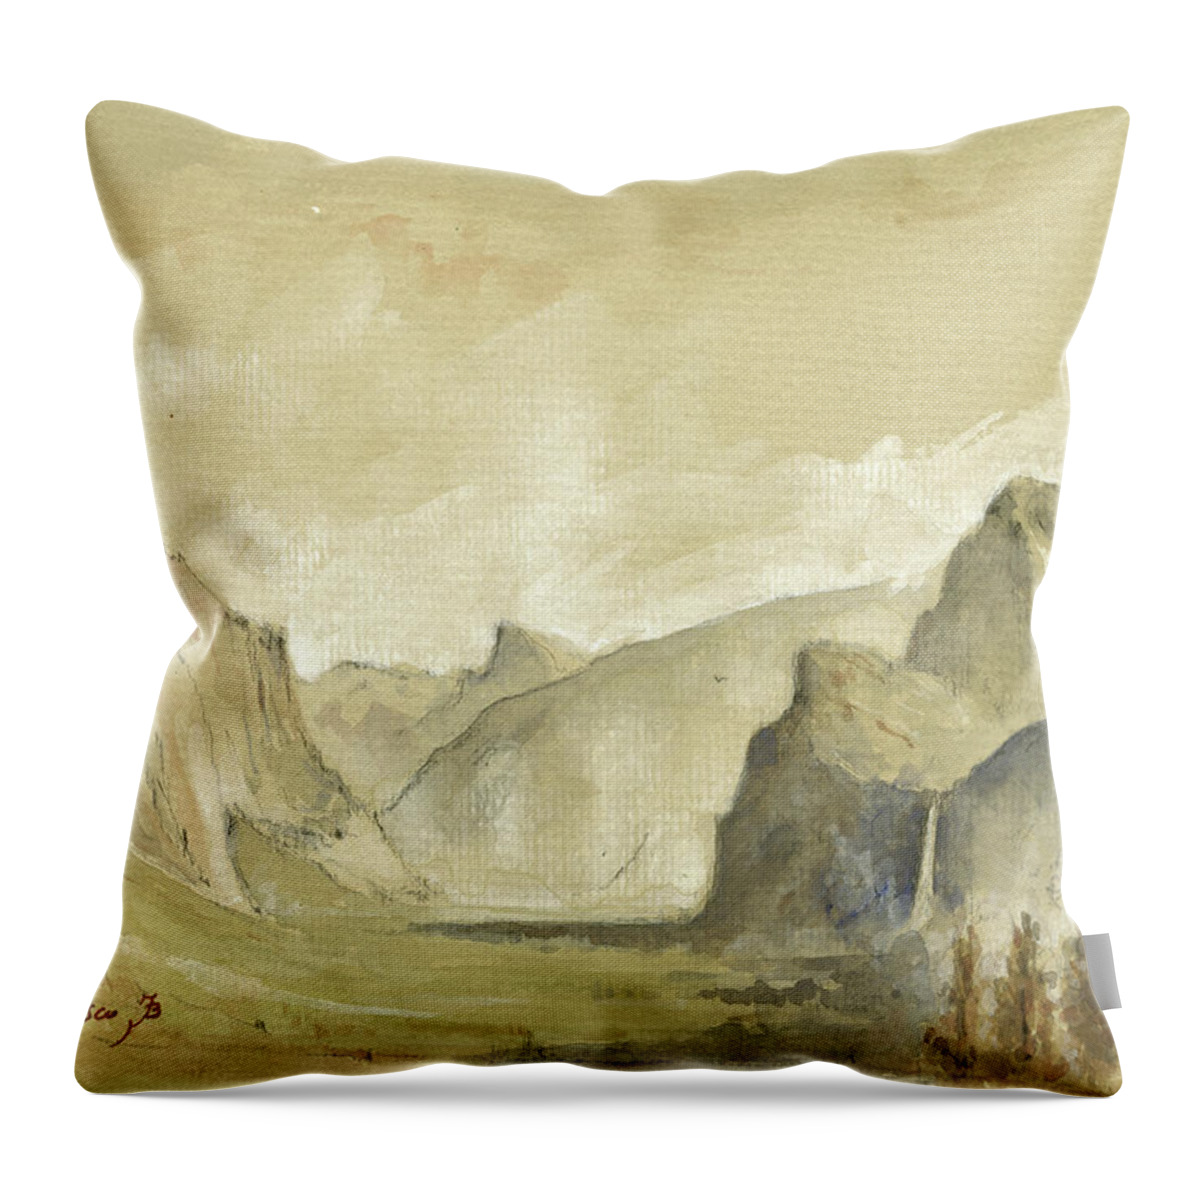 Yosemite Landscape Throw Pillow featuring the painting Yosemite national park by Juan Bosco